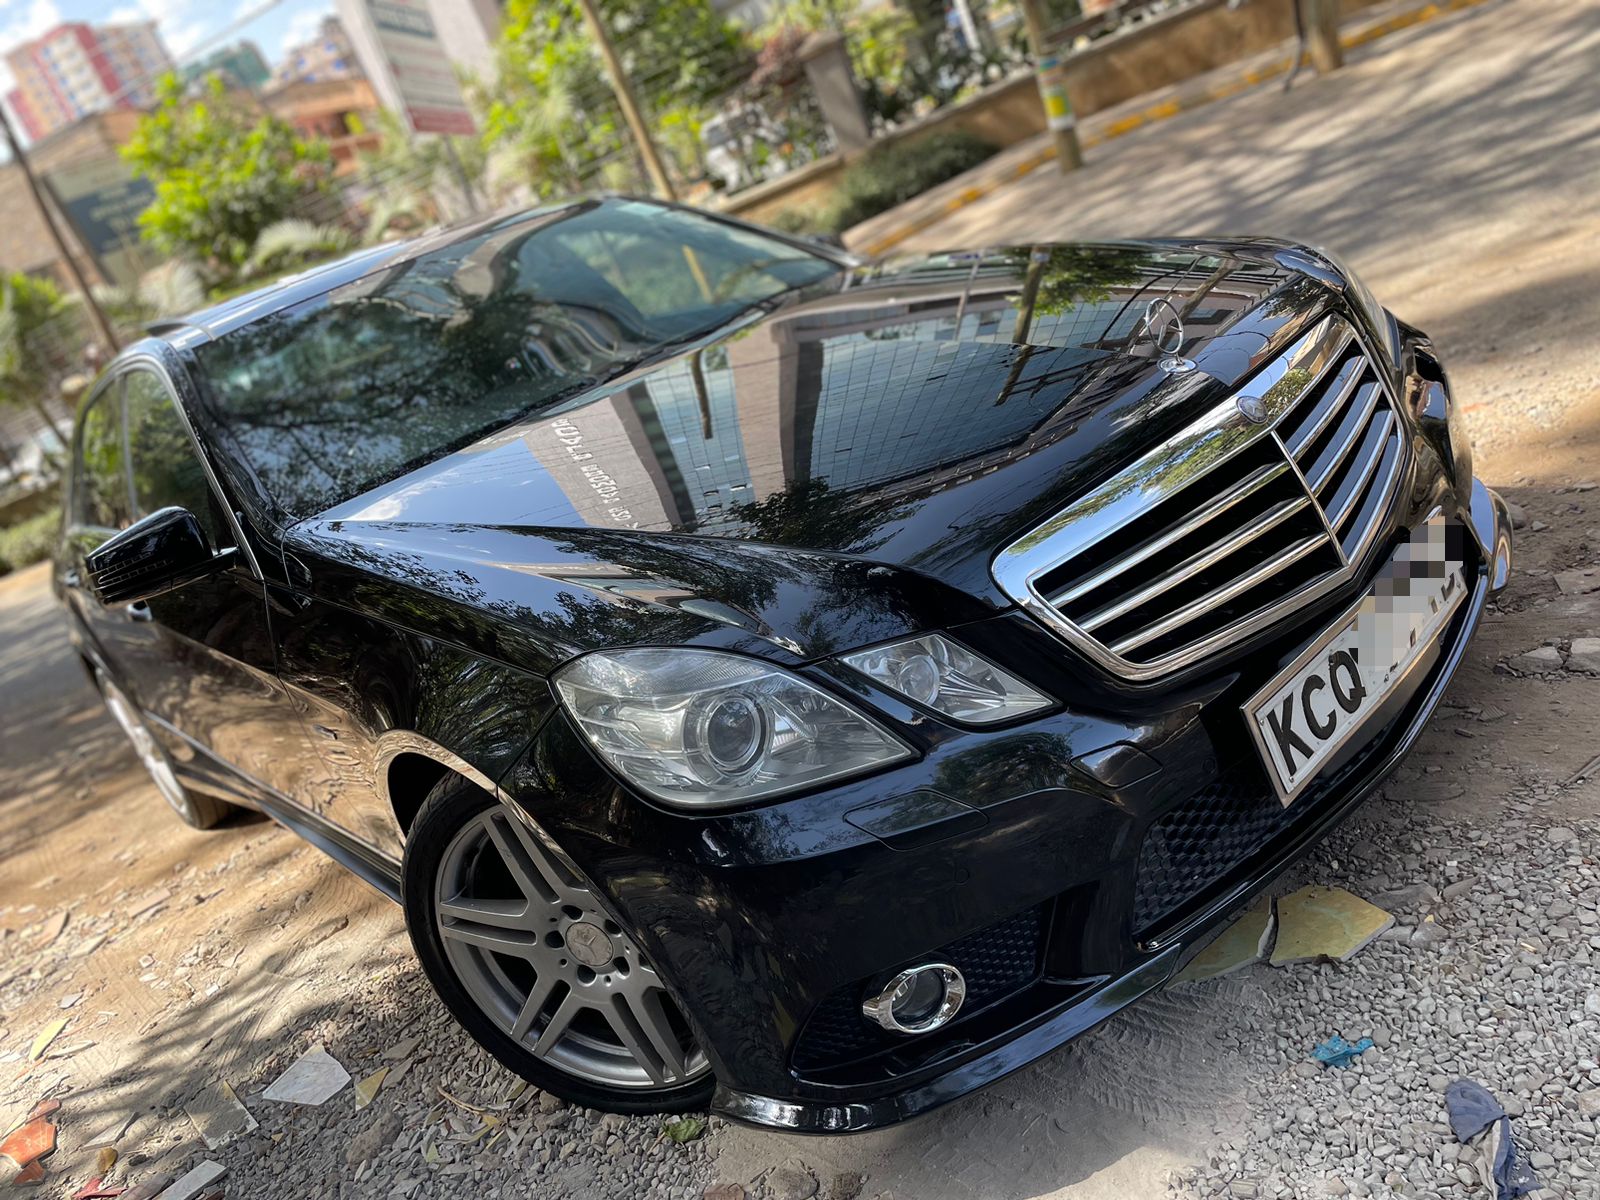 Mercedes Benz E250 2010 Cheapest You Pay 30% DEPOSIT Trade in OK